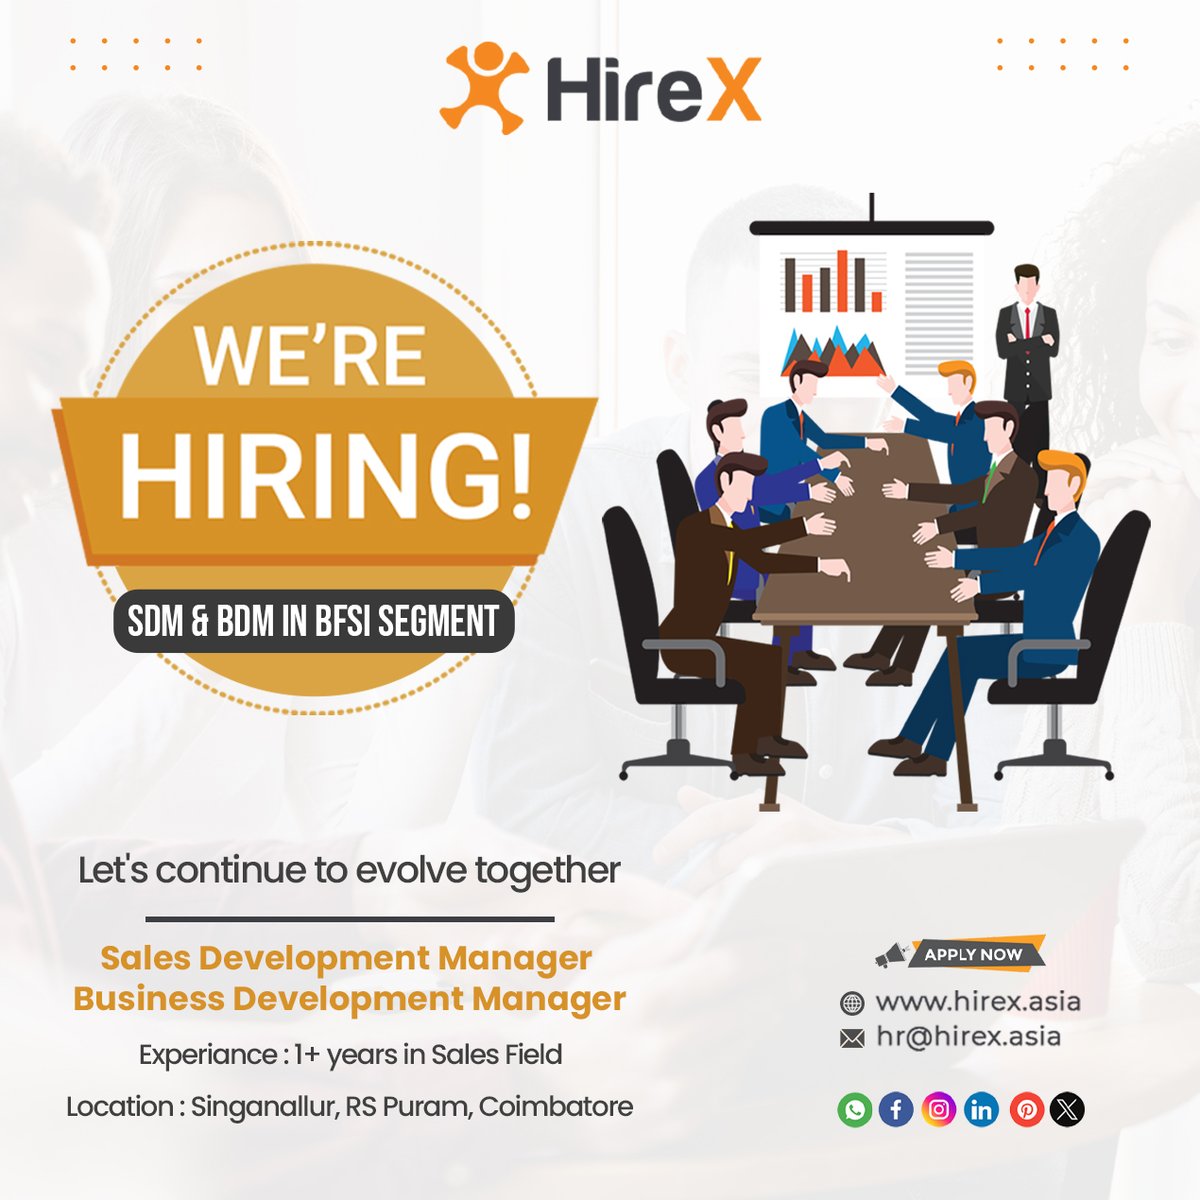 Join our vibrant team! We're on the lookout for passionate individuals ready to make an impact. Apply now to hr@hirex.asia

To begin apply right now, click this link: hirex.asia/jobs/hdfc-life…

#HireX #SalesStrategy #SalesandMarketing #SalesMarketing #SalesManagement #SalesExpert